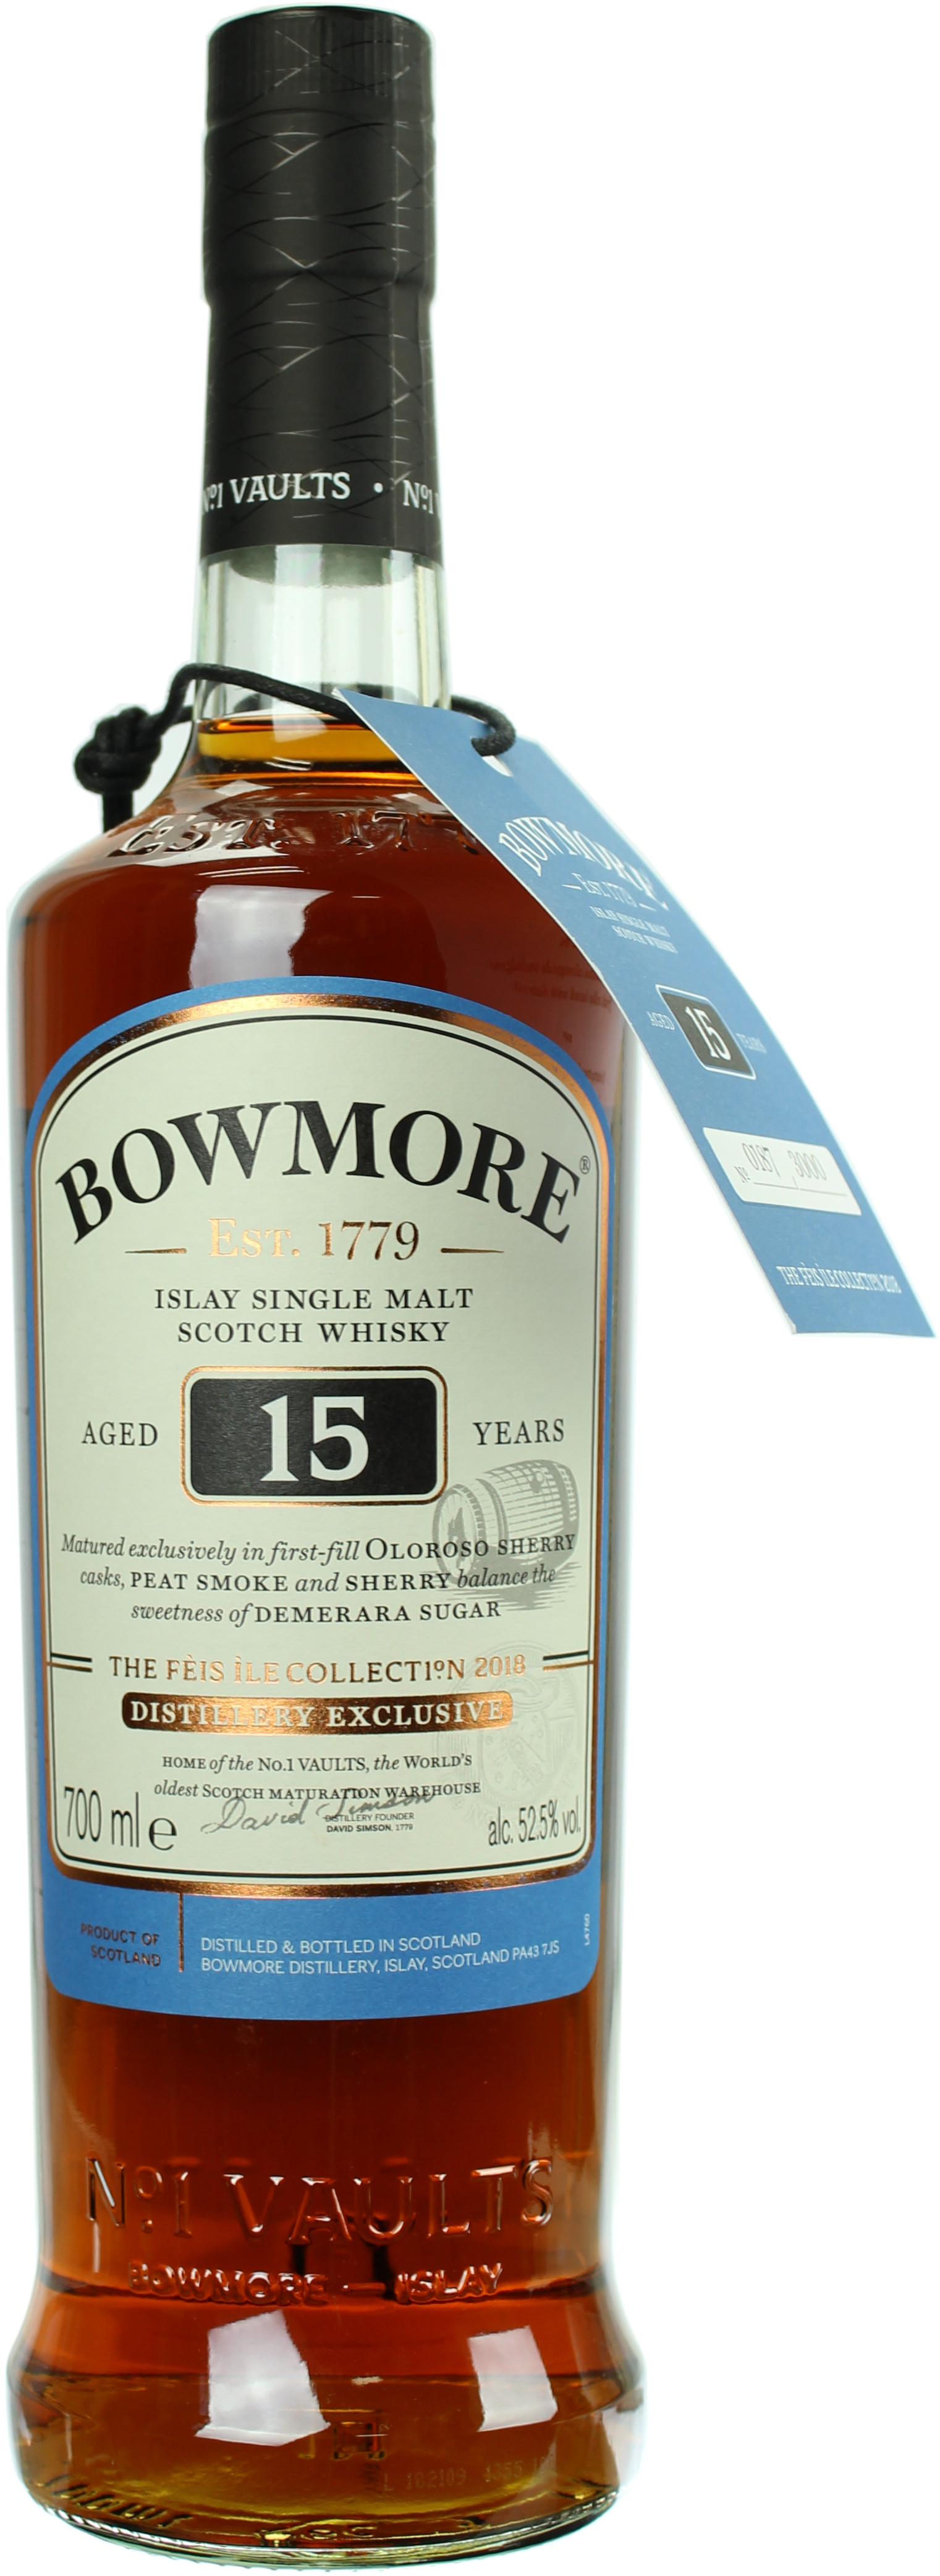 Bowmore 15 Jahre The Feis Ile Collection 2018 52.5% 0,7l